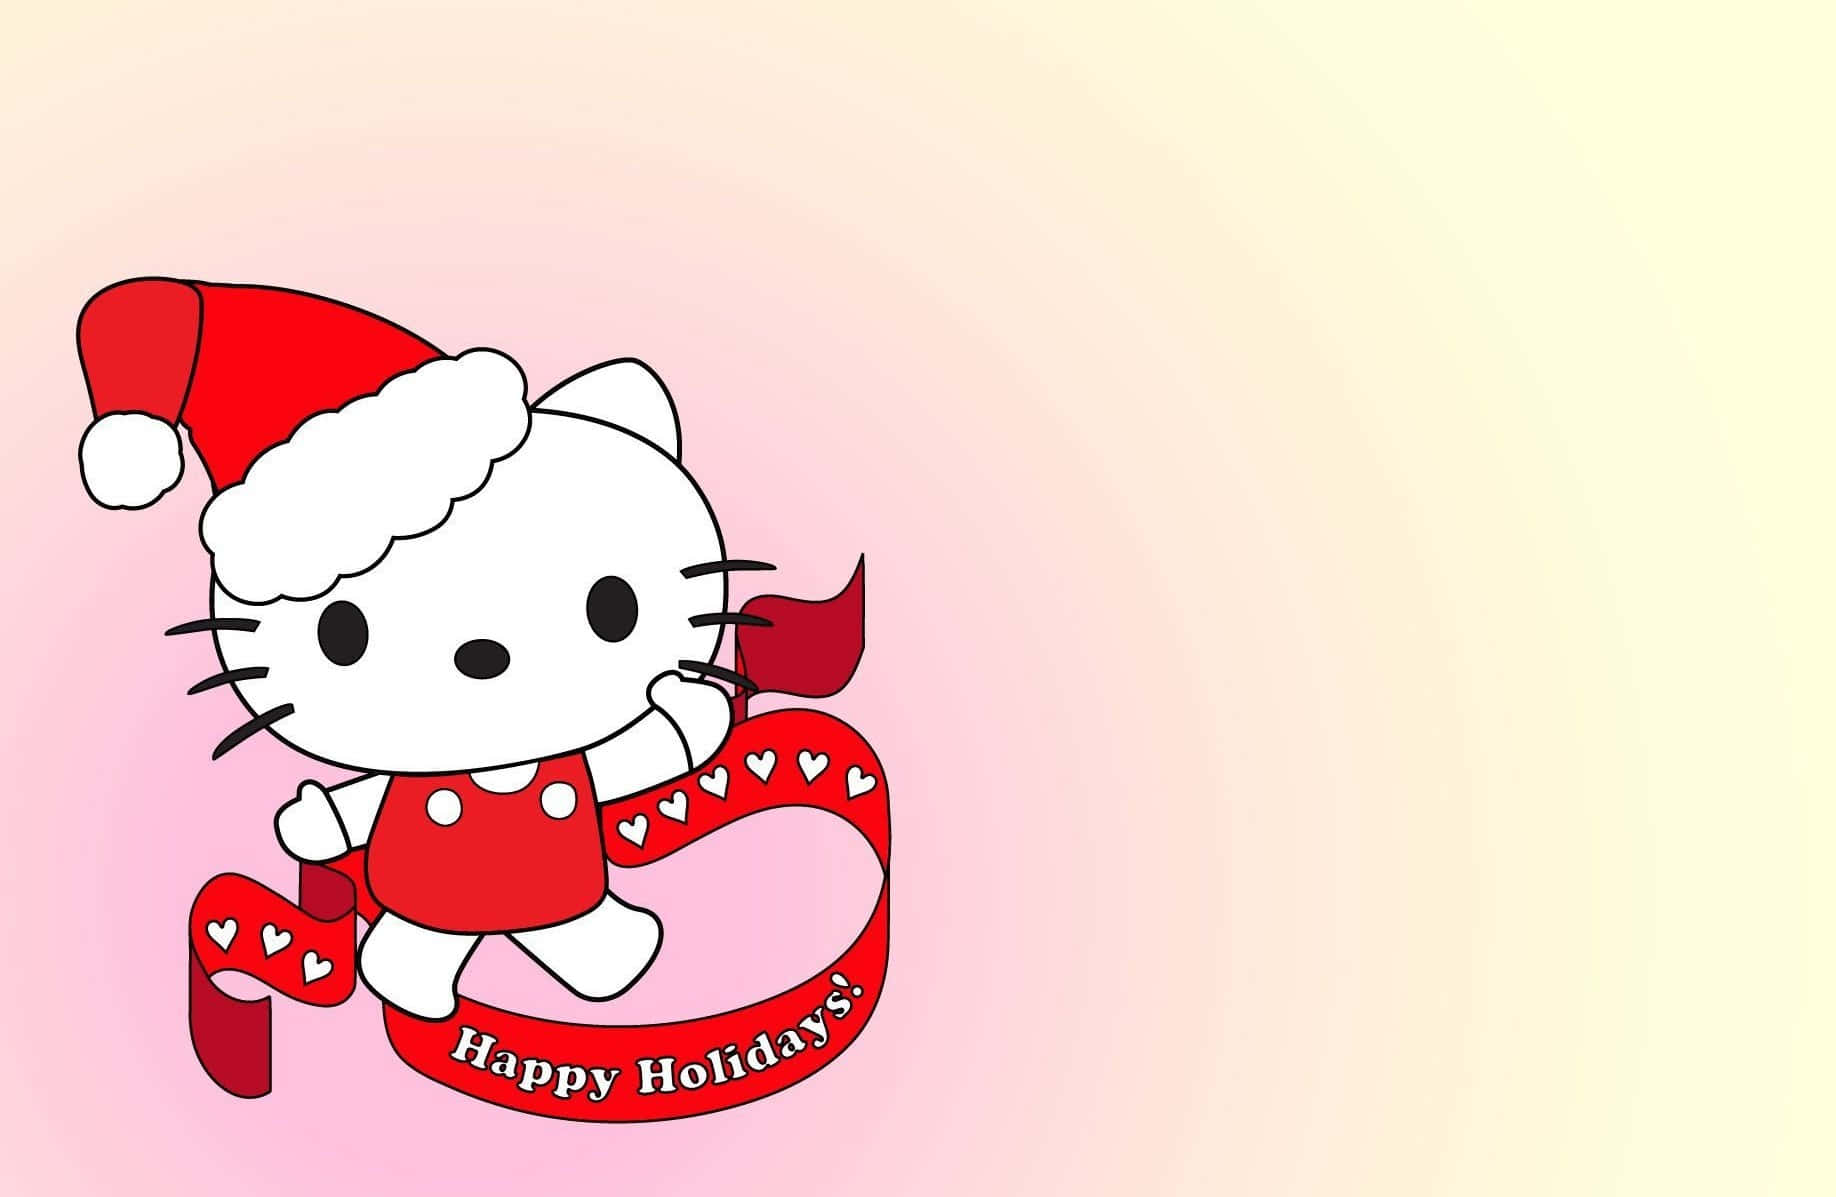 Celebrate Christmas with Hello Kitty! Wallpaper